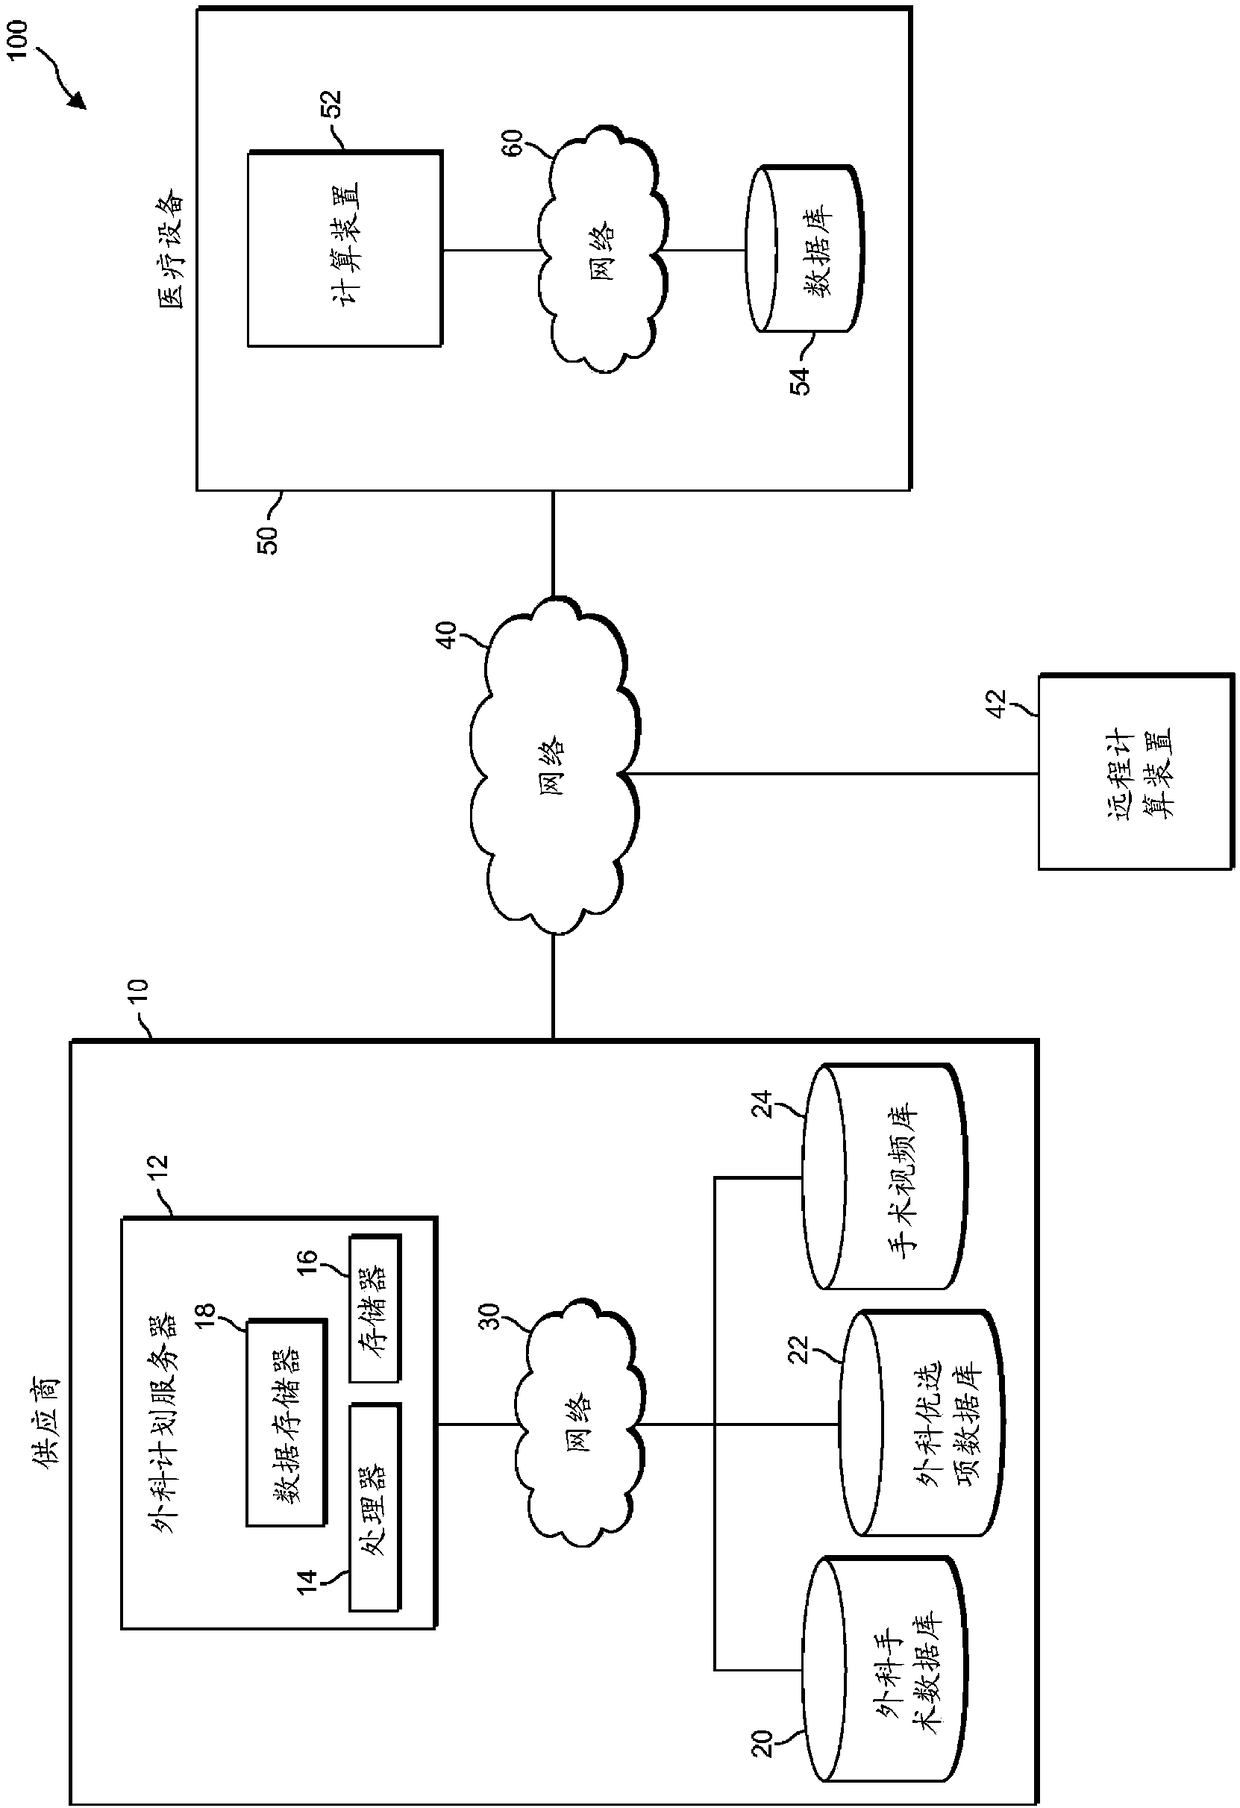 Method or system for generating patient-specific orthopedic surgery plans from medical image data